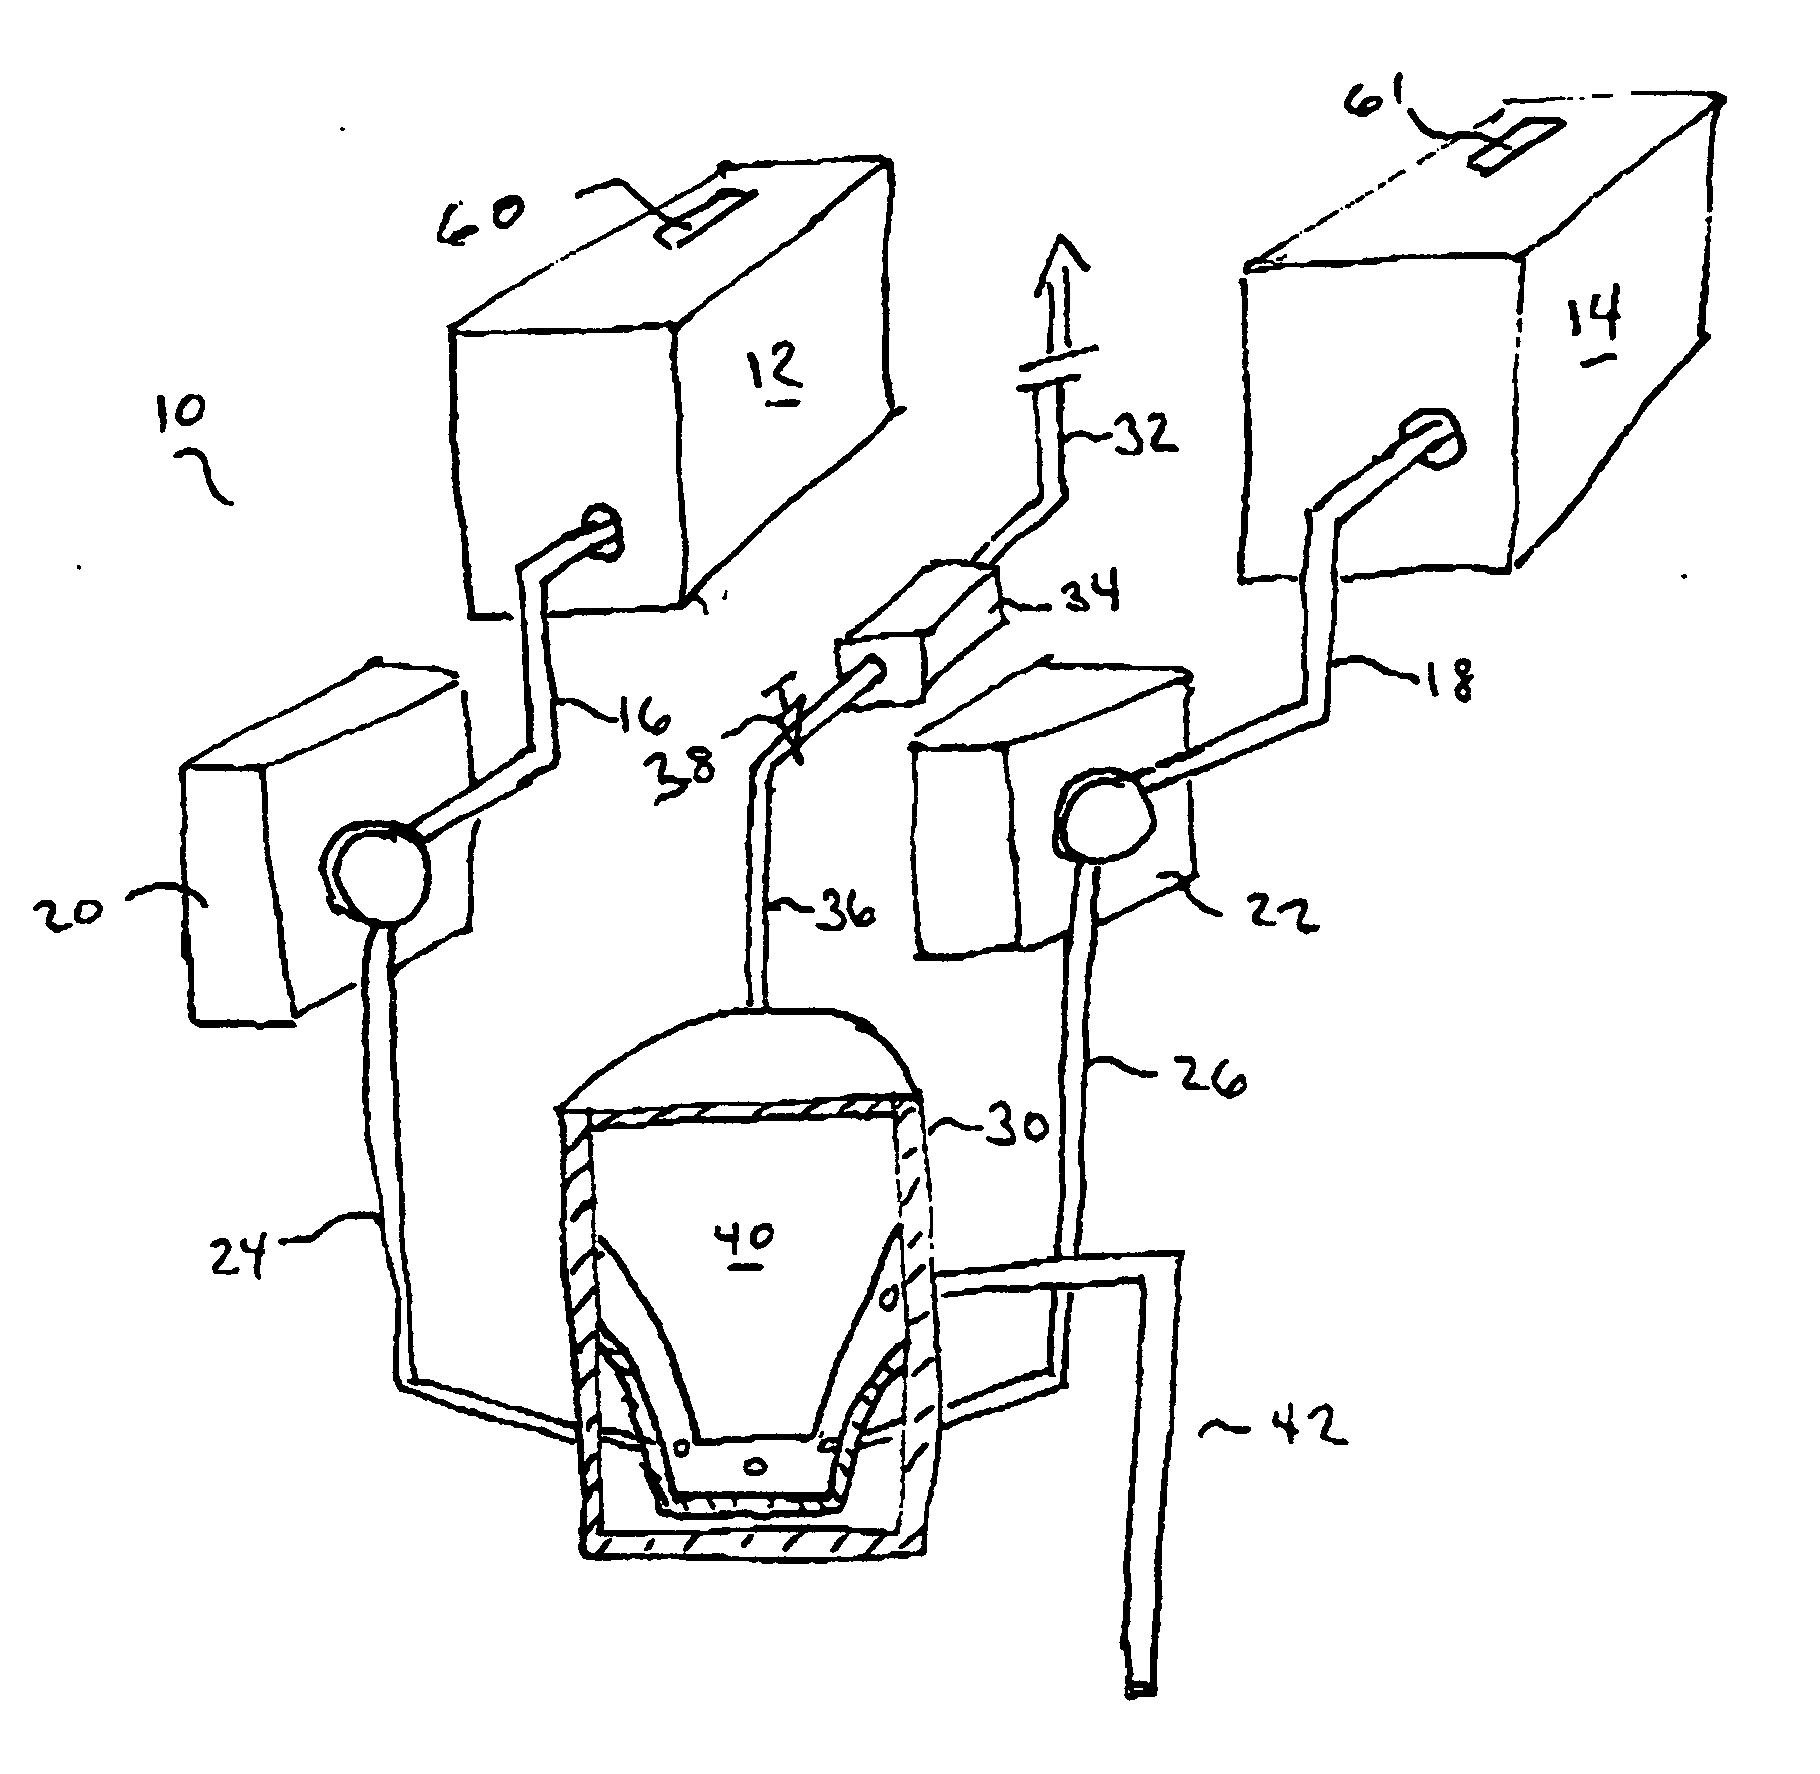 System and method for dispensing a dairy product